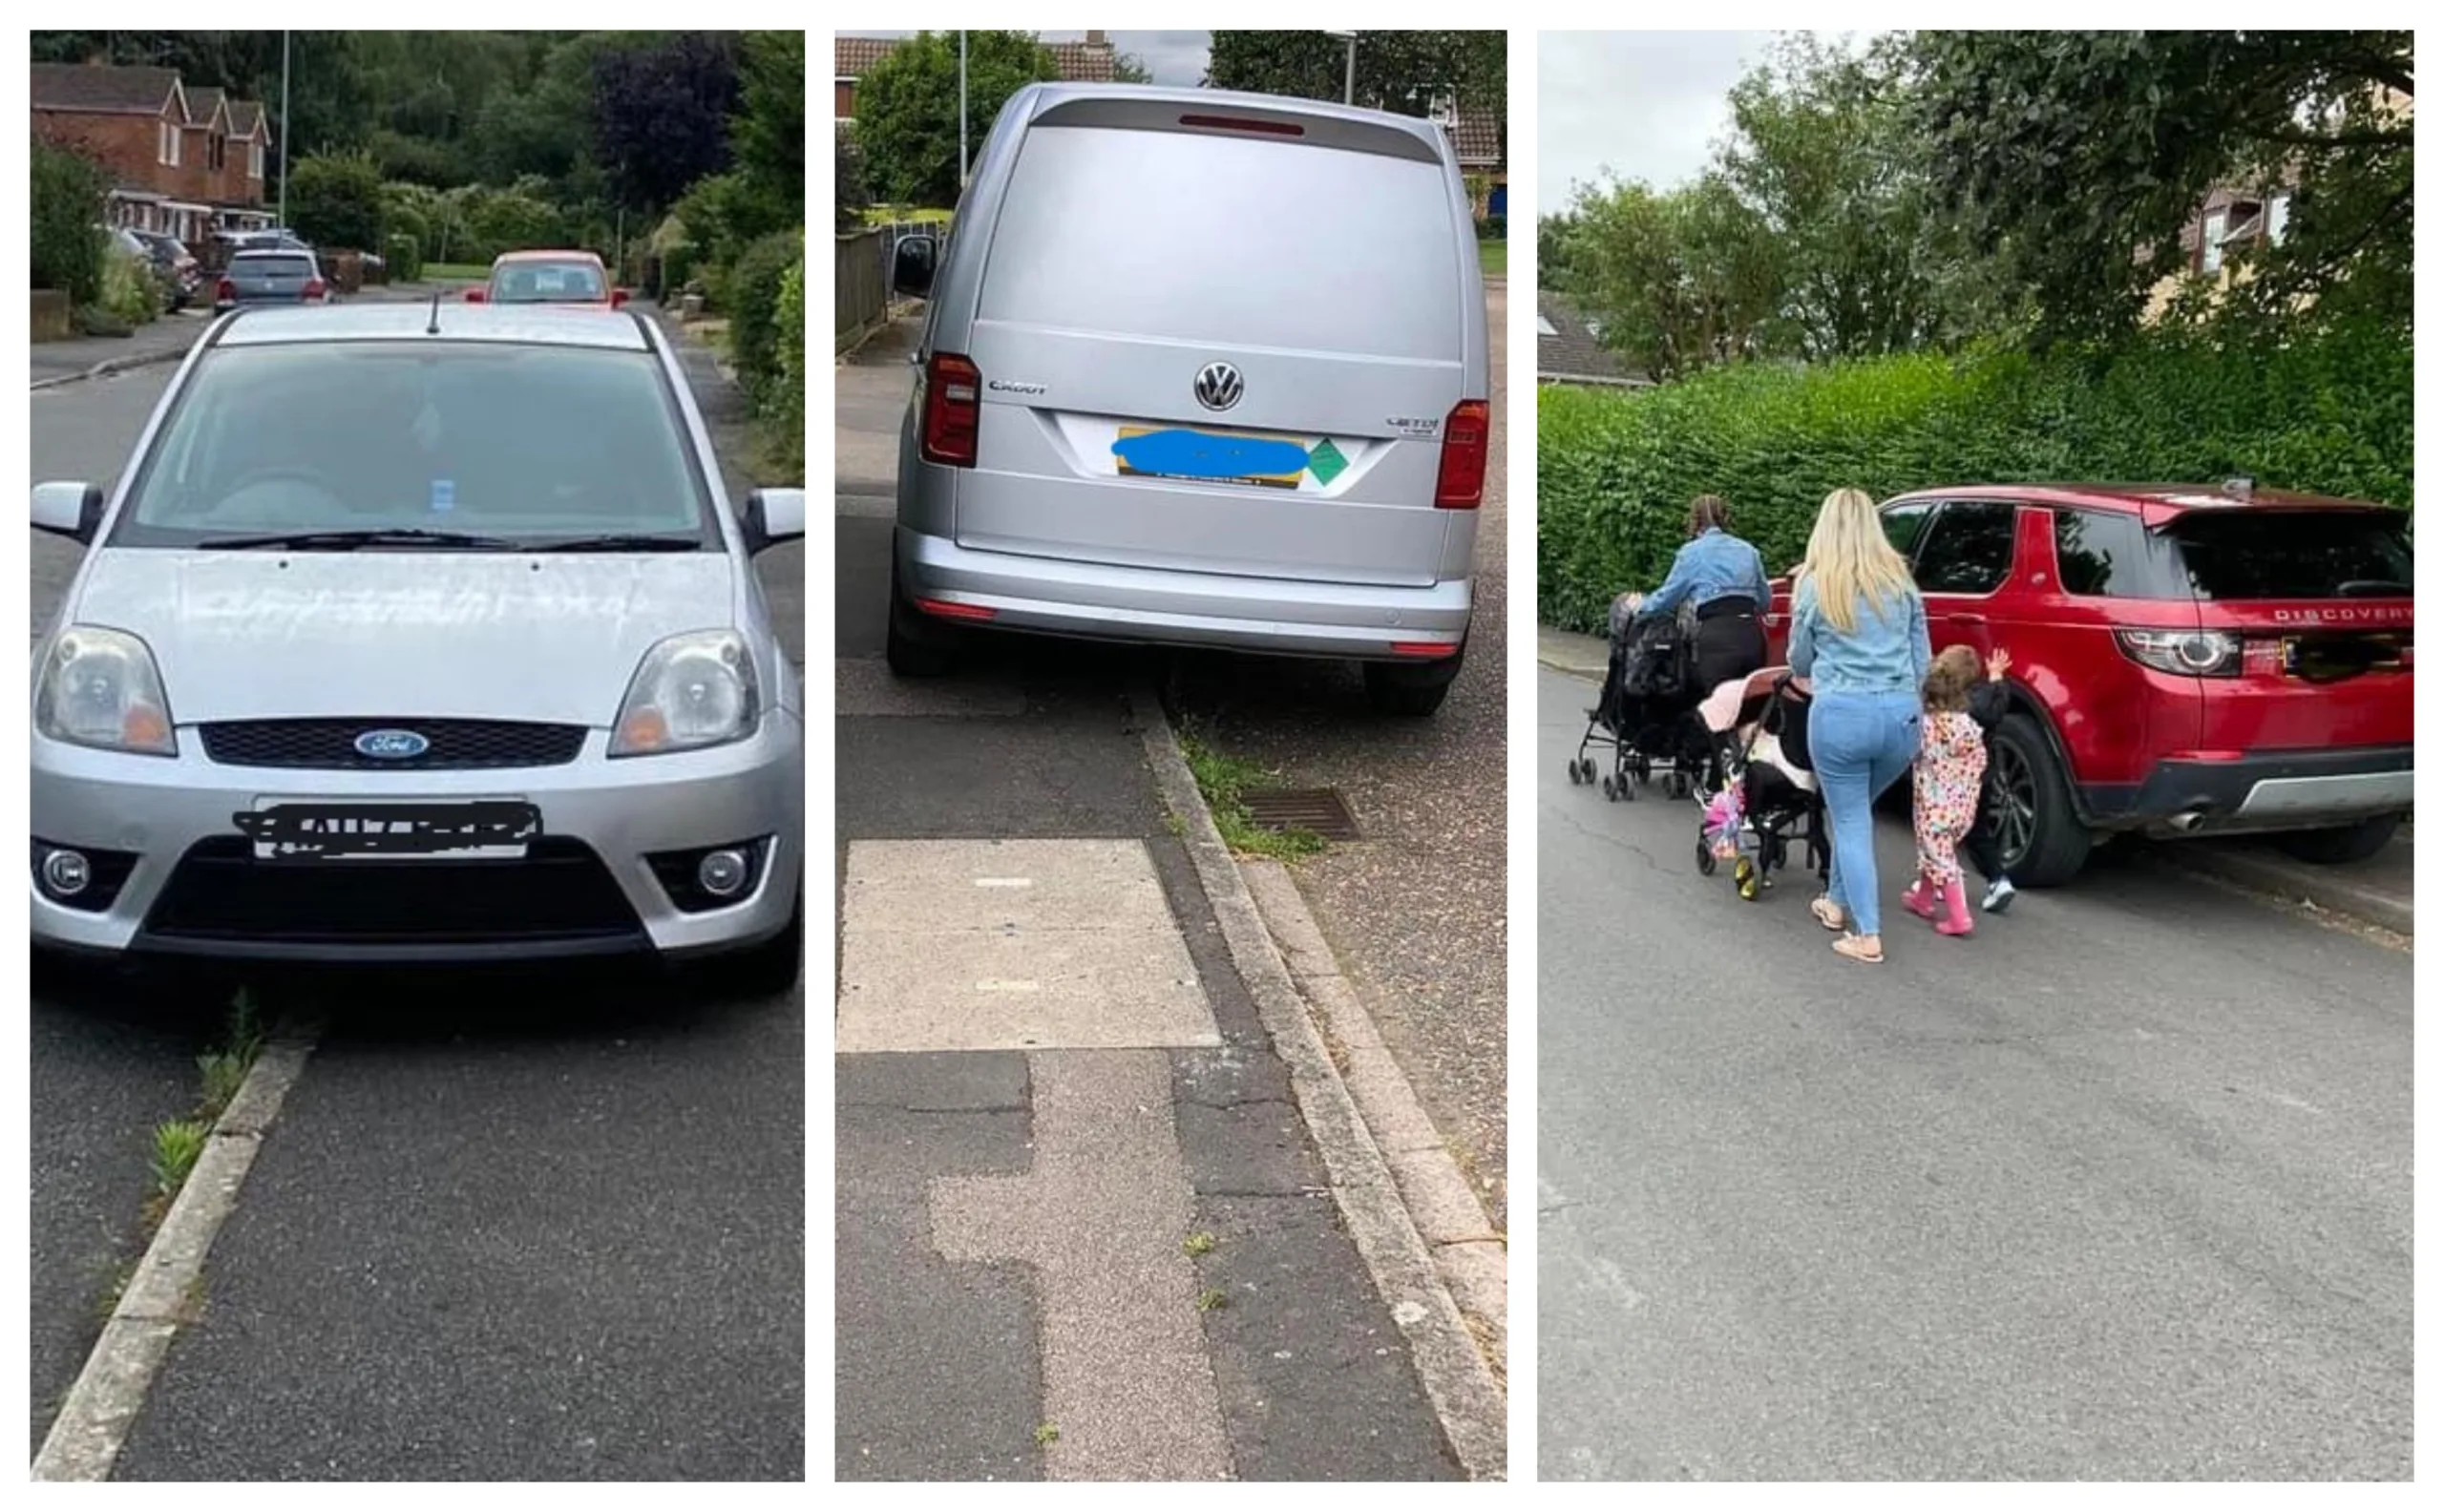 You don’t have to travel far in Cambridgeshire to see examples of cars using pavements to park on; these photos from Ely, Wisbech and Cambridgeshire